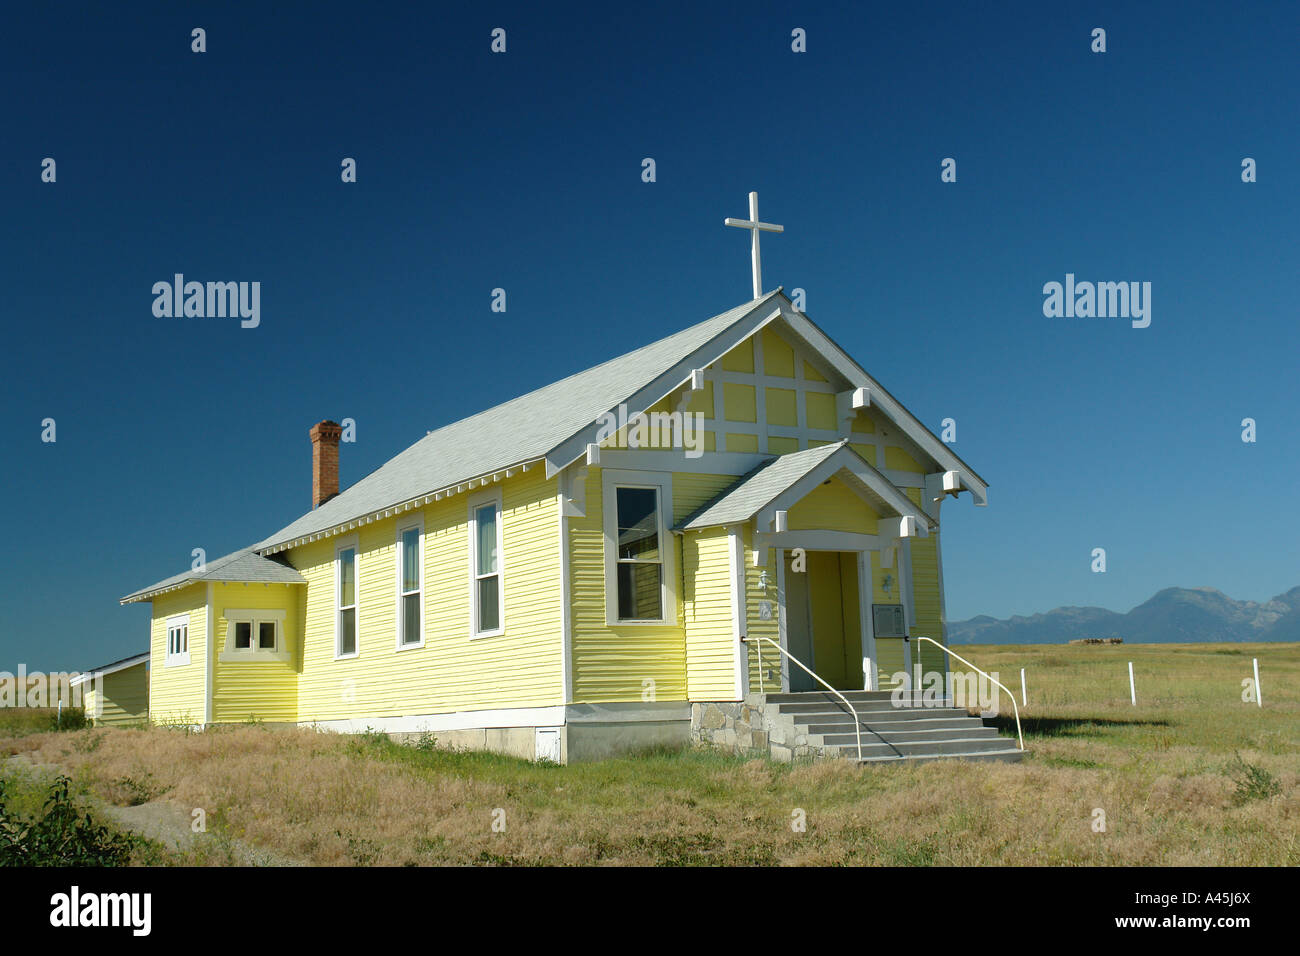 AJD56491, Moiese, MT, Montana, Flathead Indian Reservation, Mission Valley, Indian Church Stock Photo